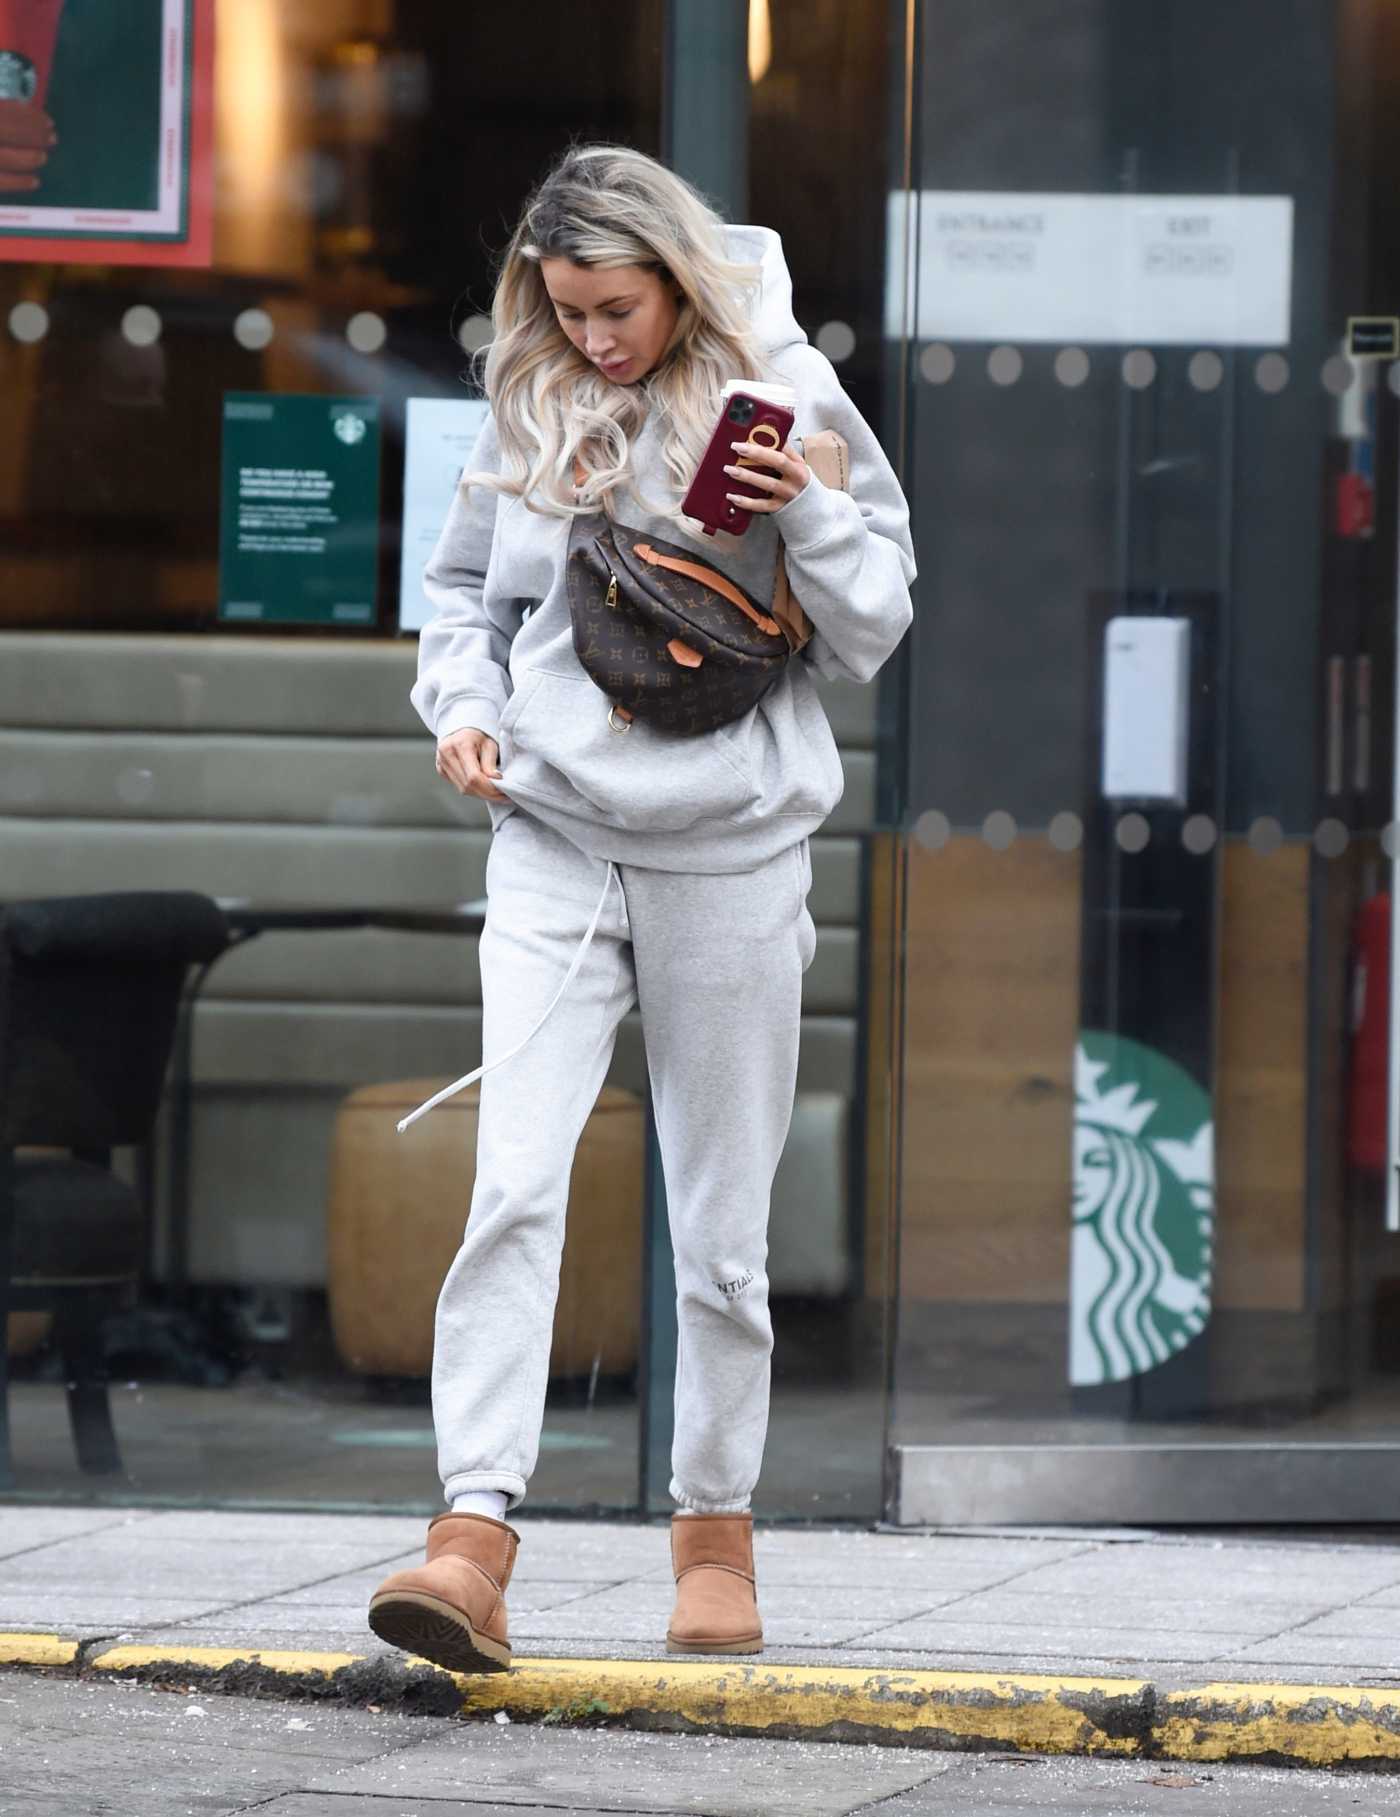 Olivia Attwood in a Grey Sweatsuit Grabs a Drink at Starbucks in Manchester 12/01/2020